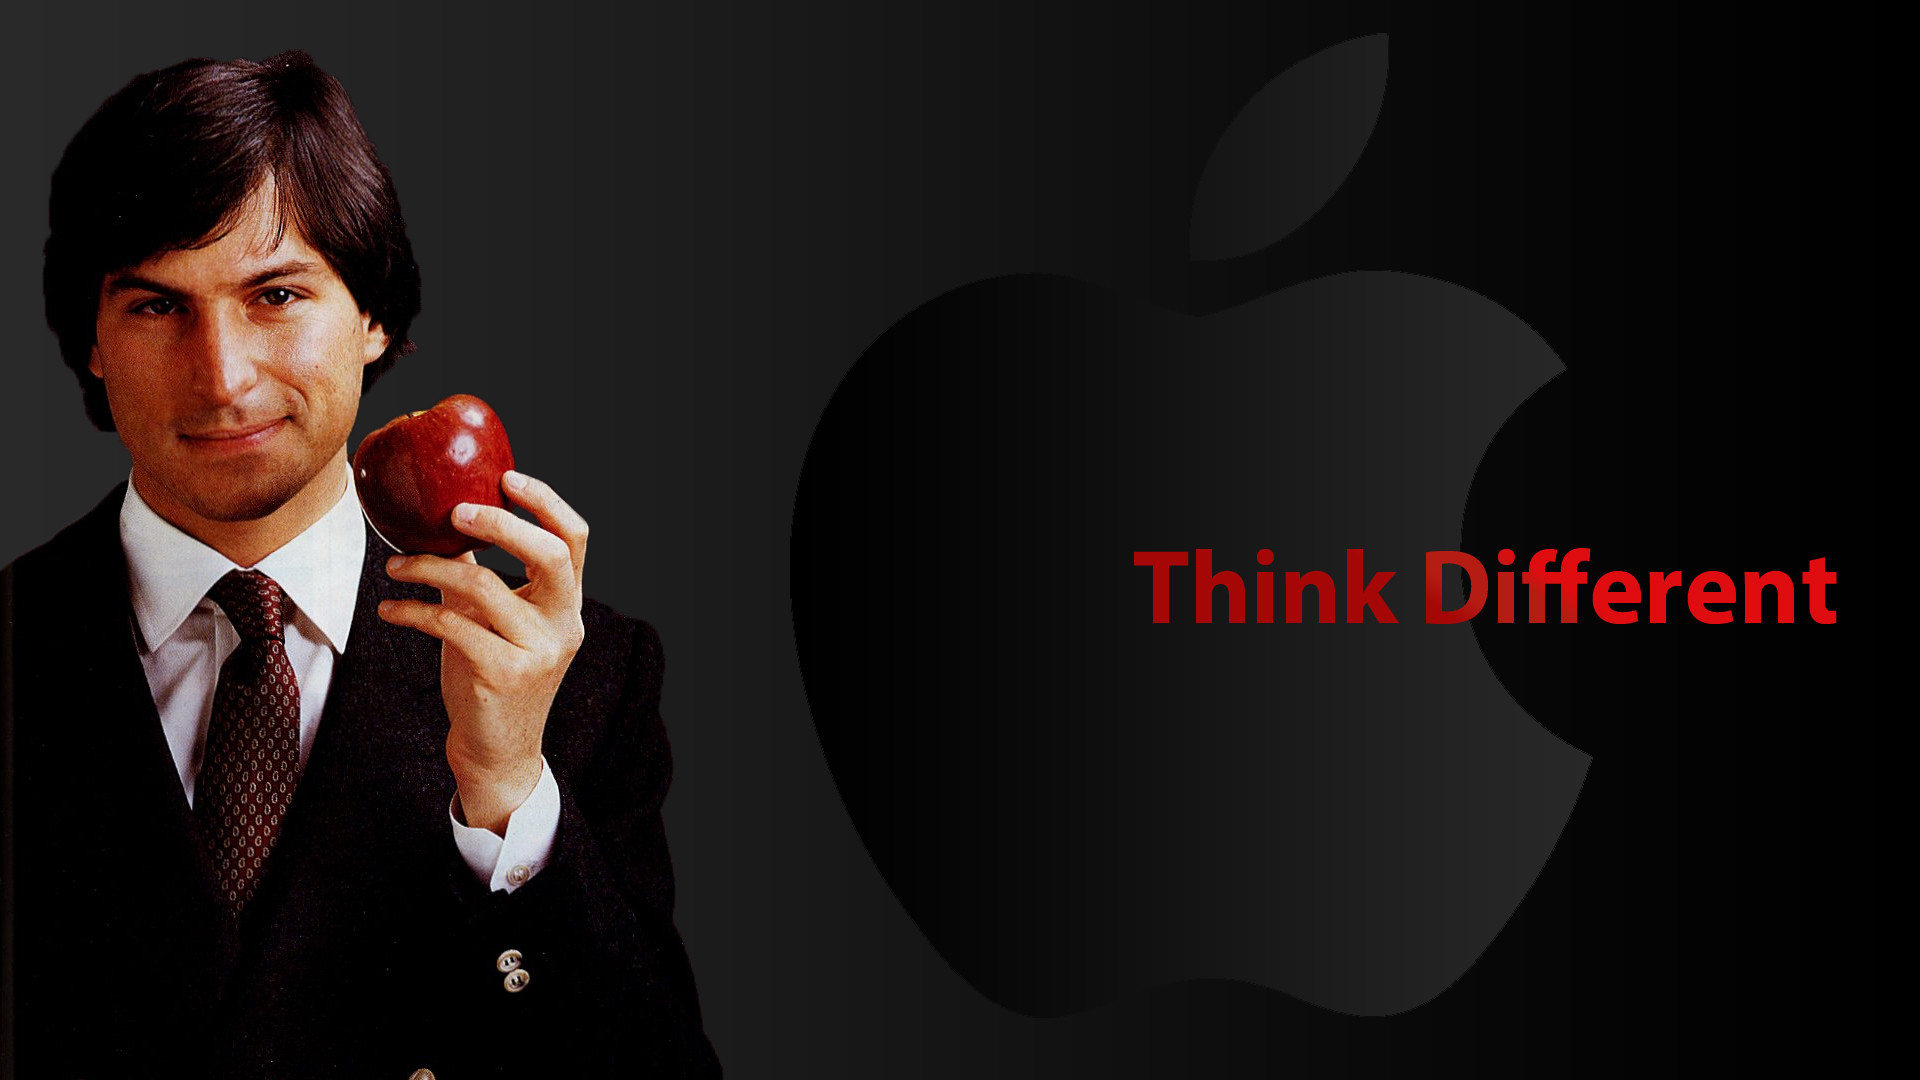 1920x1080 ... Steve Jobs Think Different Wallpaper 1920X1080 by JiaGraphics